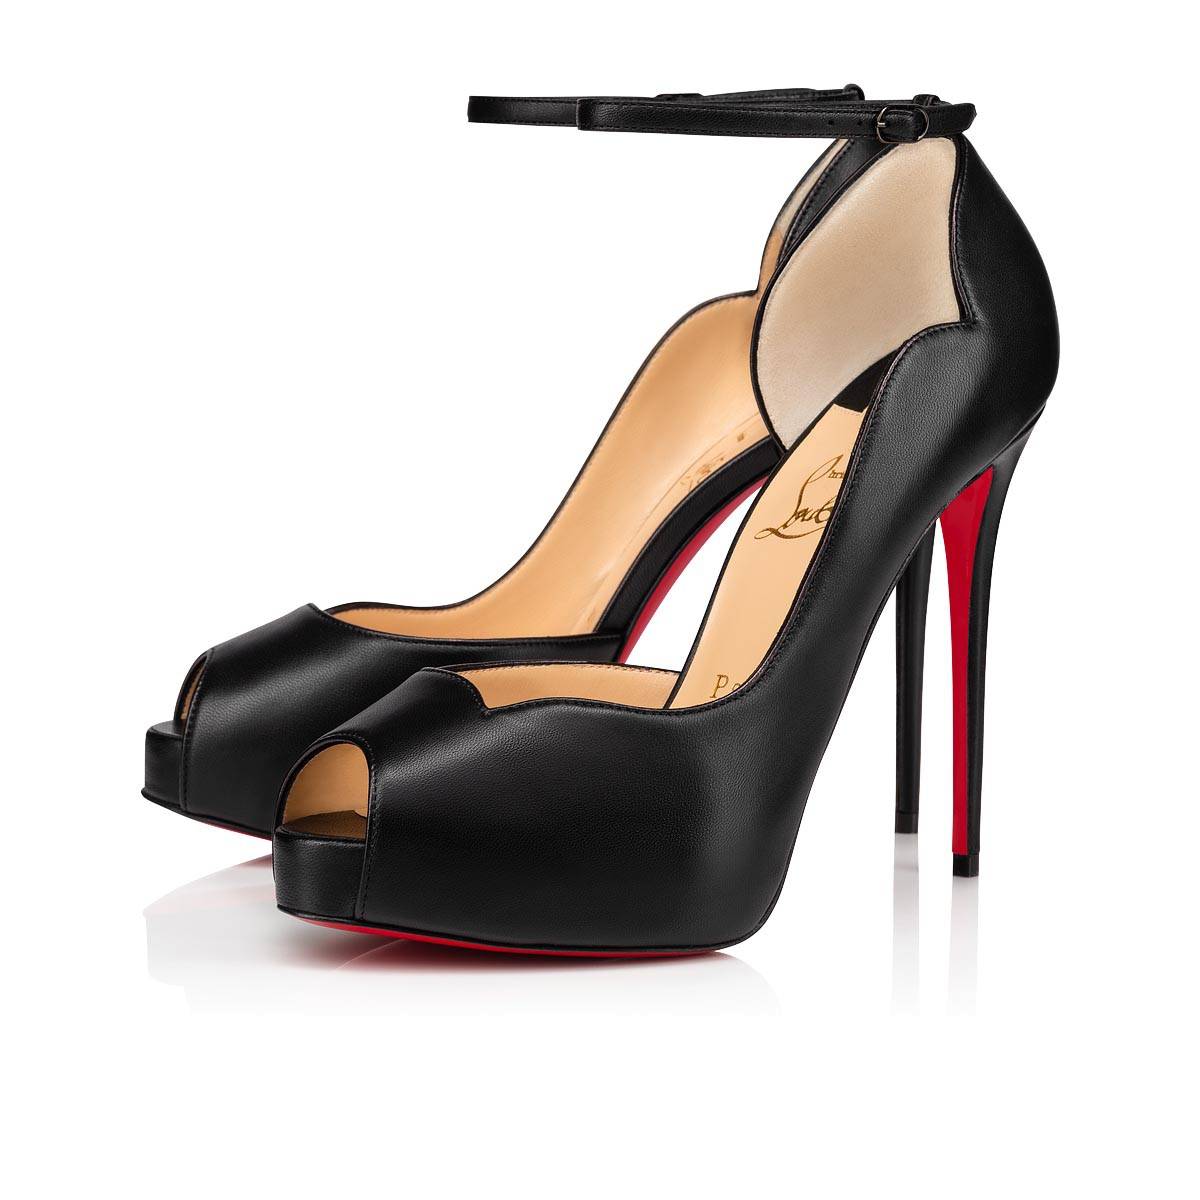 Red Bottoms Peep Toe Pumps Online Shopping - Christian Louboutin Round ...